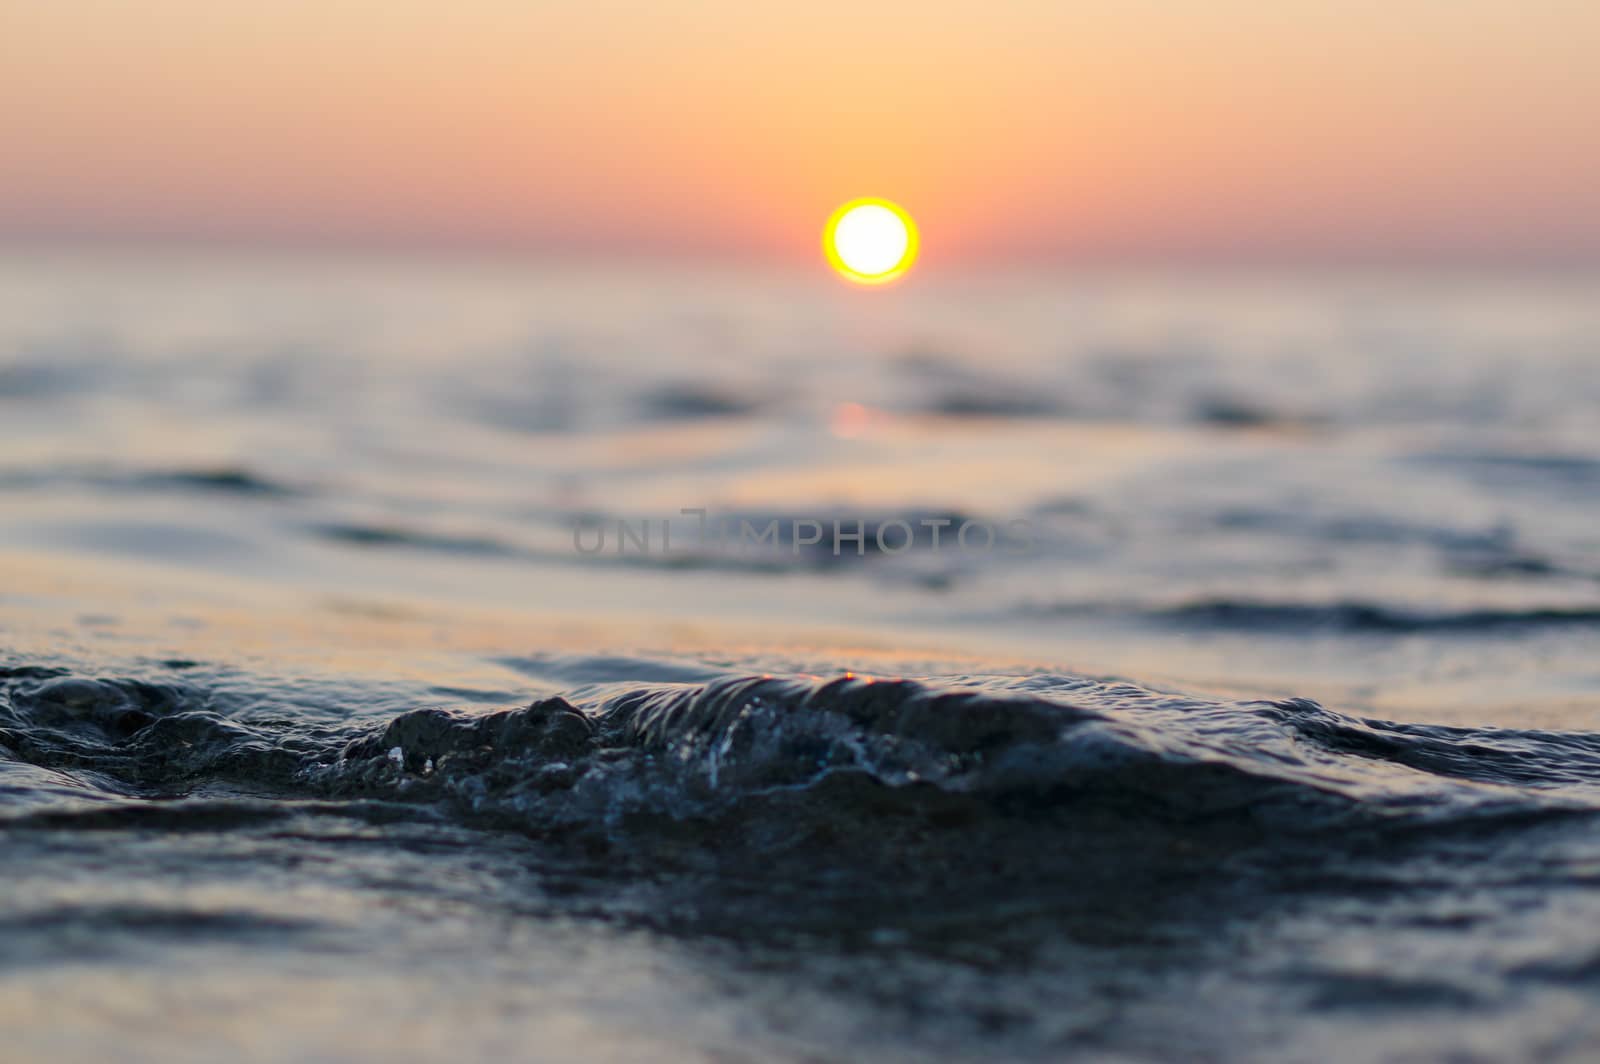 sea wave close up at sunset time with red and orange sun reflection on the water. nature abstract blurred background. Phuket island, Thailand by evolutionnow